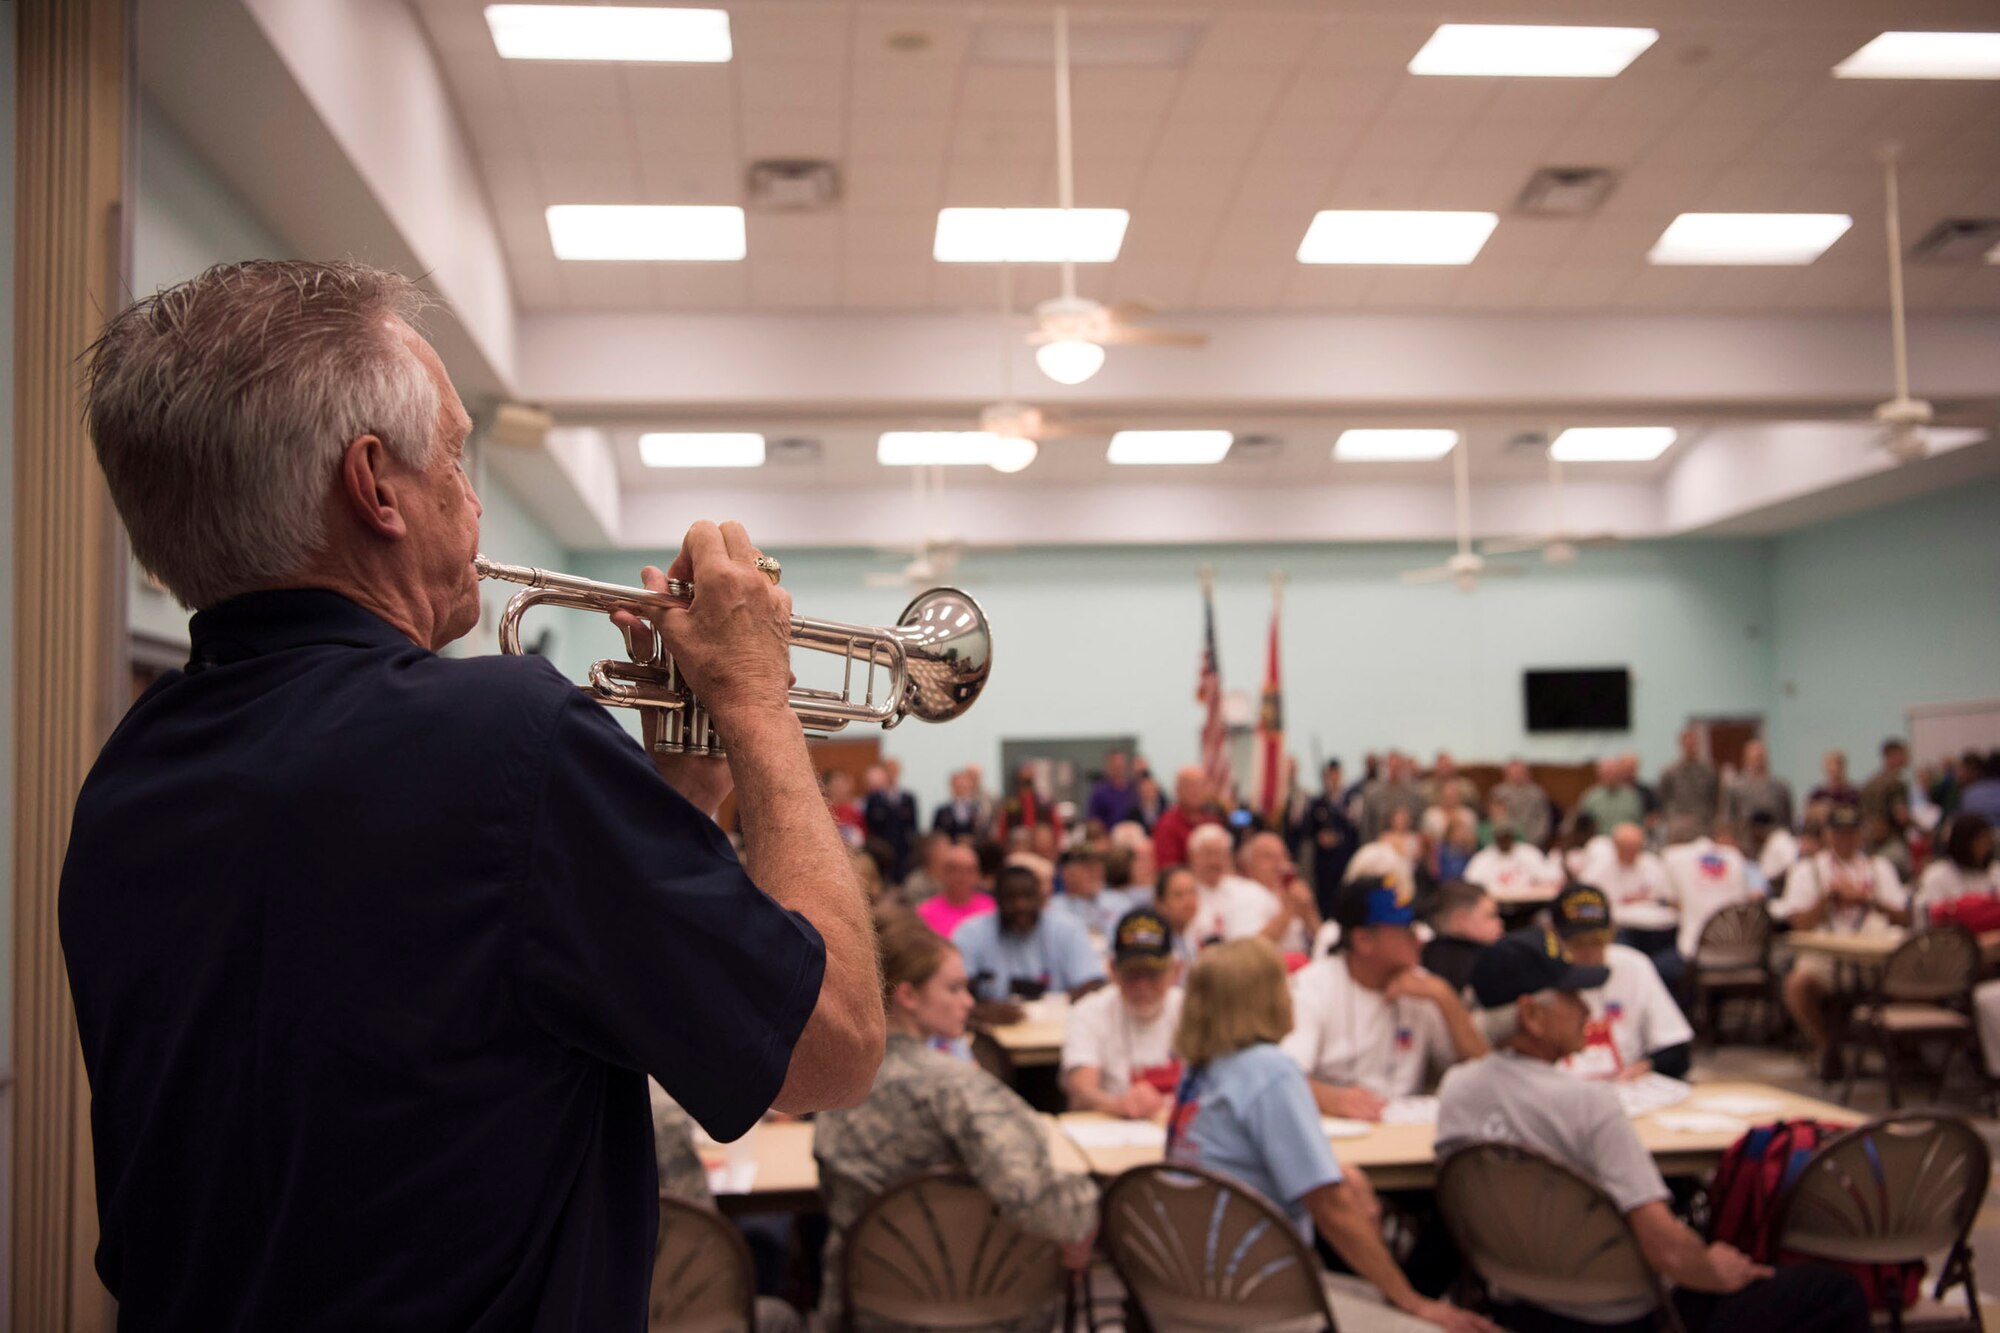 Duke Scales, a volunteer in the Space Coast Honor Flight program, plays morning reveille for all in attendance May 26, 2018 at the Wickham Park Senior Center in Melbourne, Fla. Veterans who served in World War II, the Korean War and the Vietnam War gathered at the senior center to fly to Washington D.C. and visit war memorials dedicated to the sacrifices they made, along with their fellow service members. (U.S. Air Force photo by Airman 1st Class Zoe Thacker)